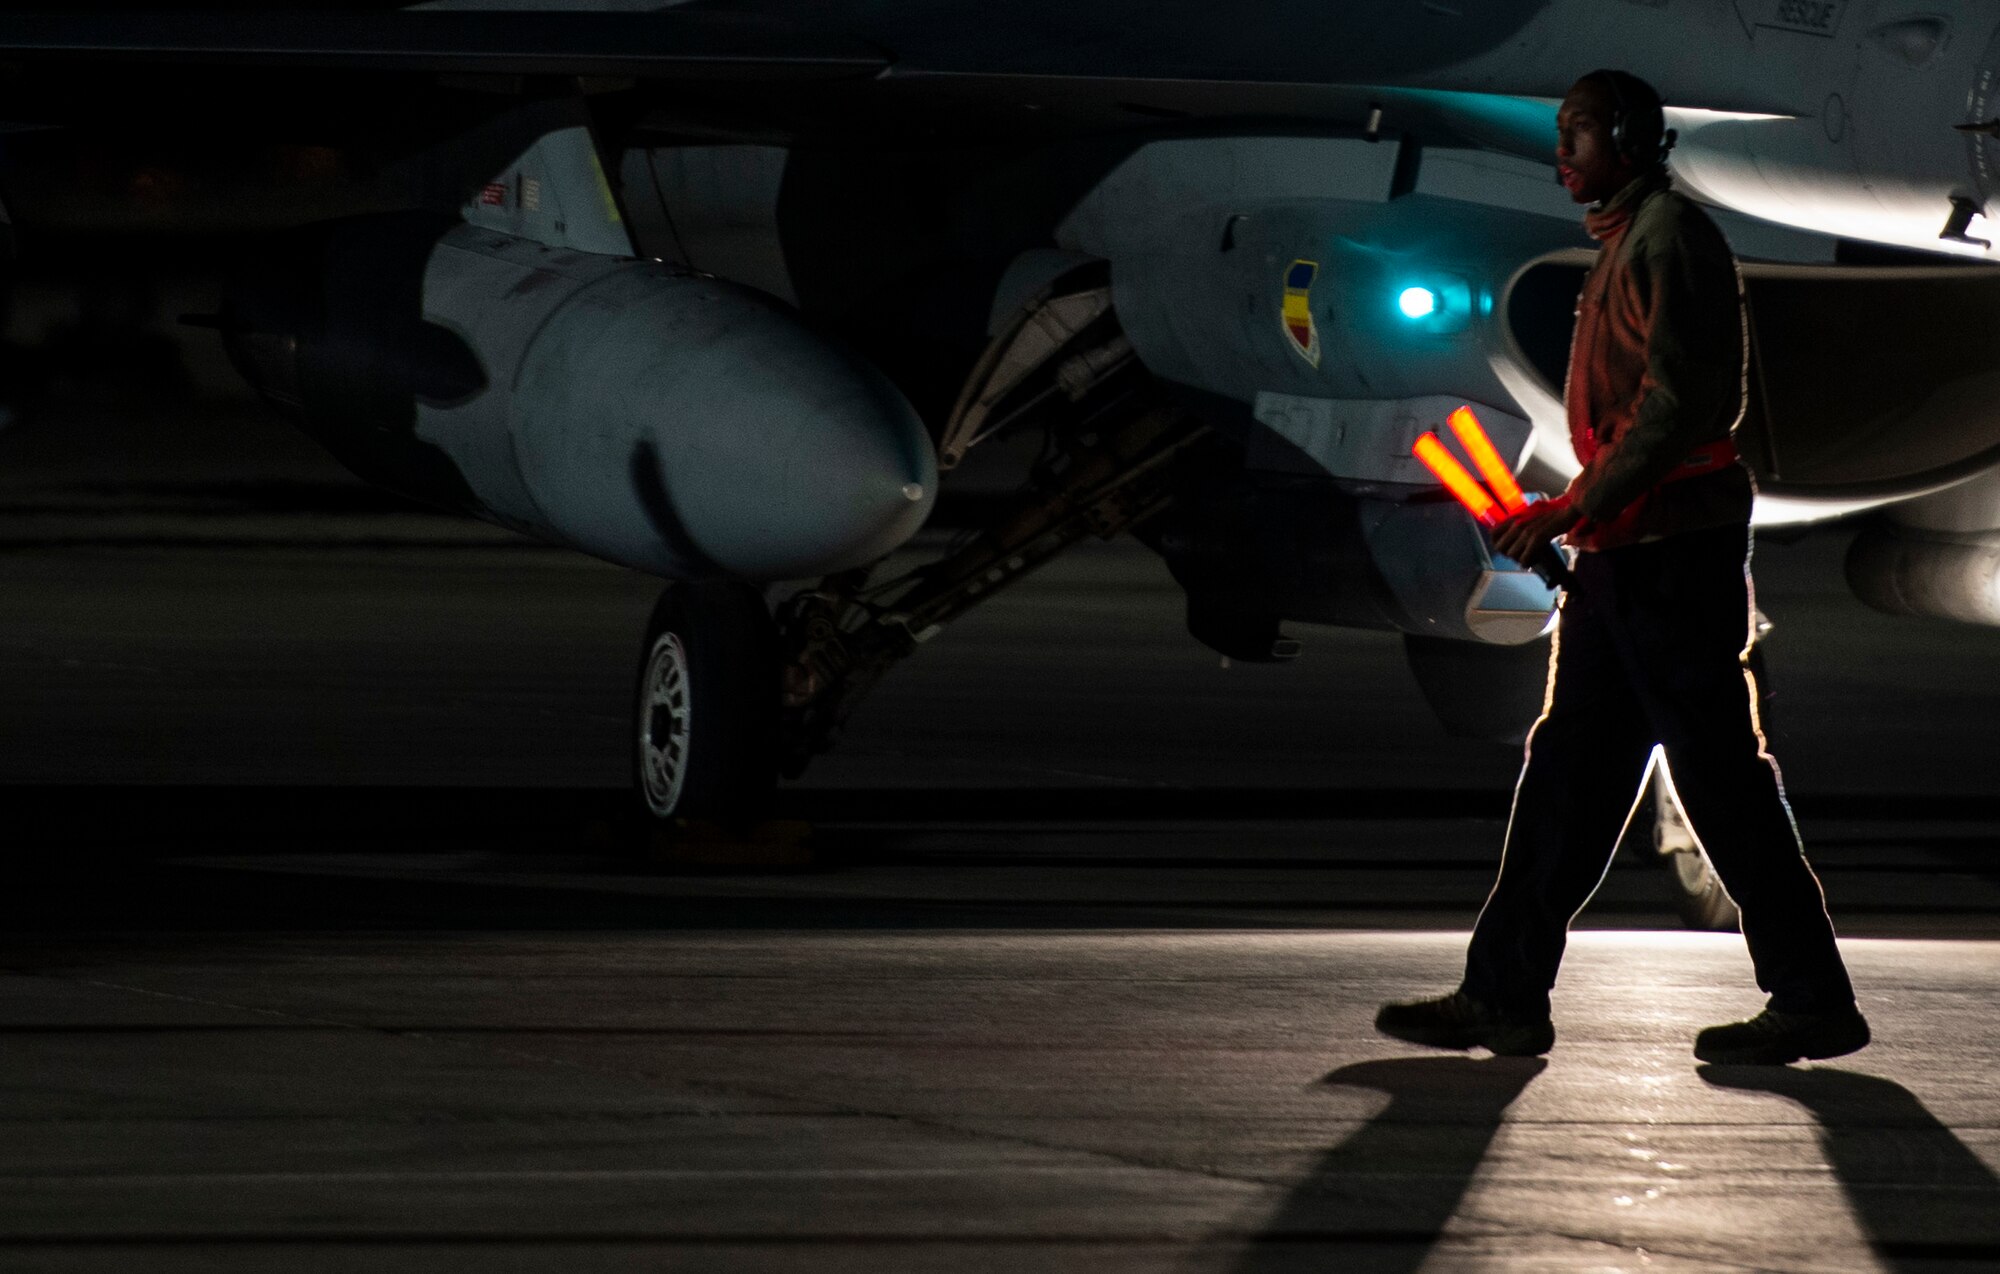 A U.S. Airman assigned to the 20th Aircraft Maintenance Squadron, 79th Aircraft Maintenance Unit, prepares to marshal an F-16CM Fighting Falcon during Exercise Red Flag 19-1 at Nellis Air Force Base, Nev., Jan. 30, 2019.